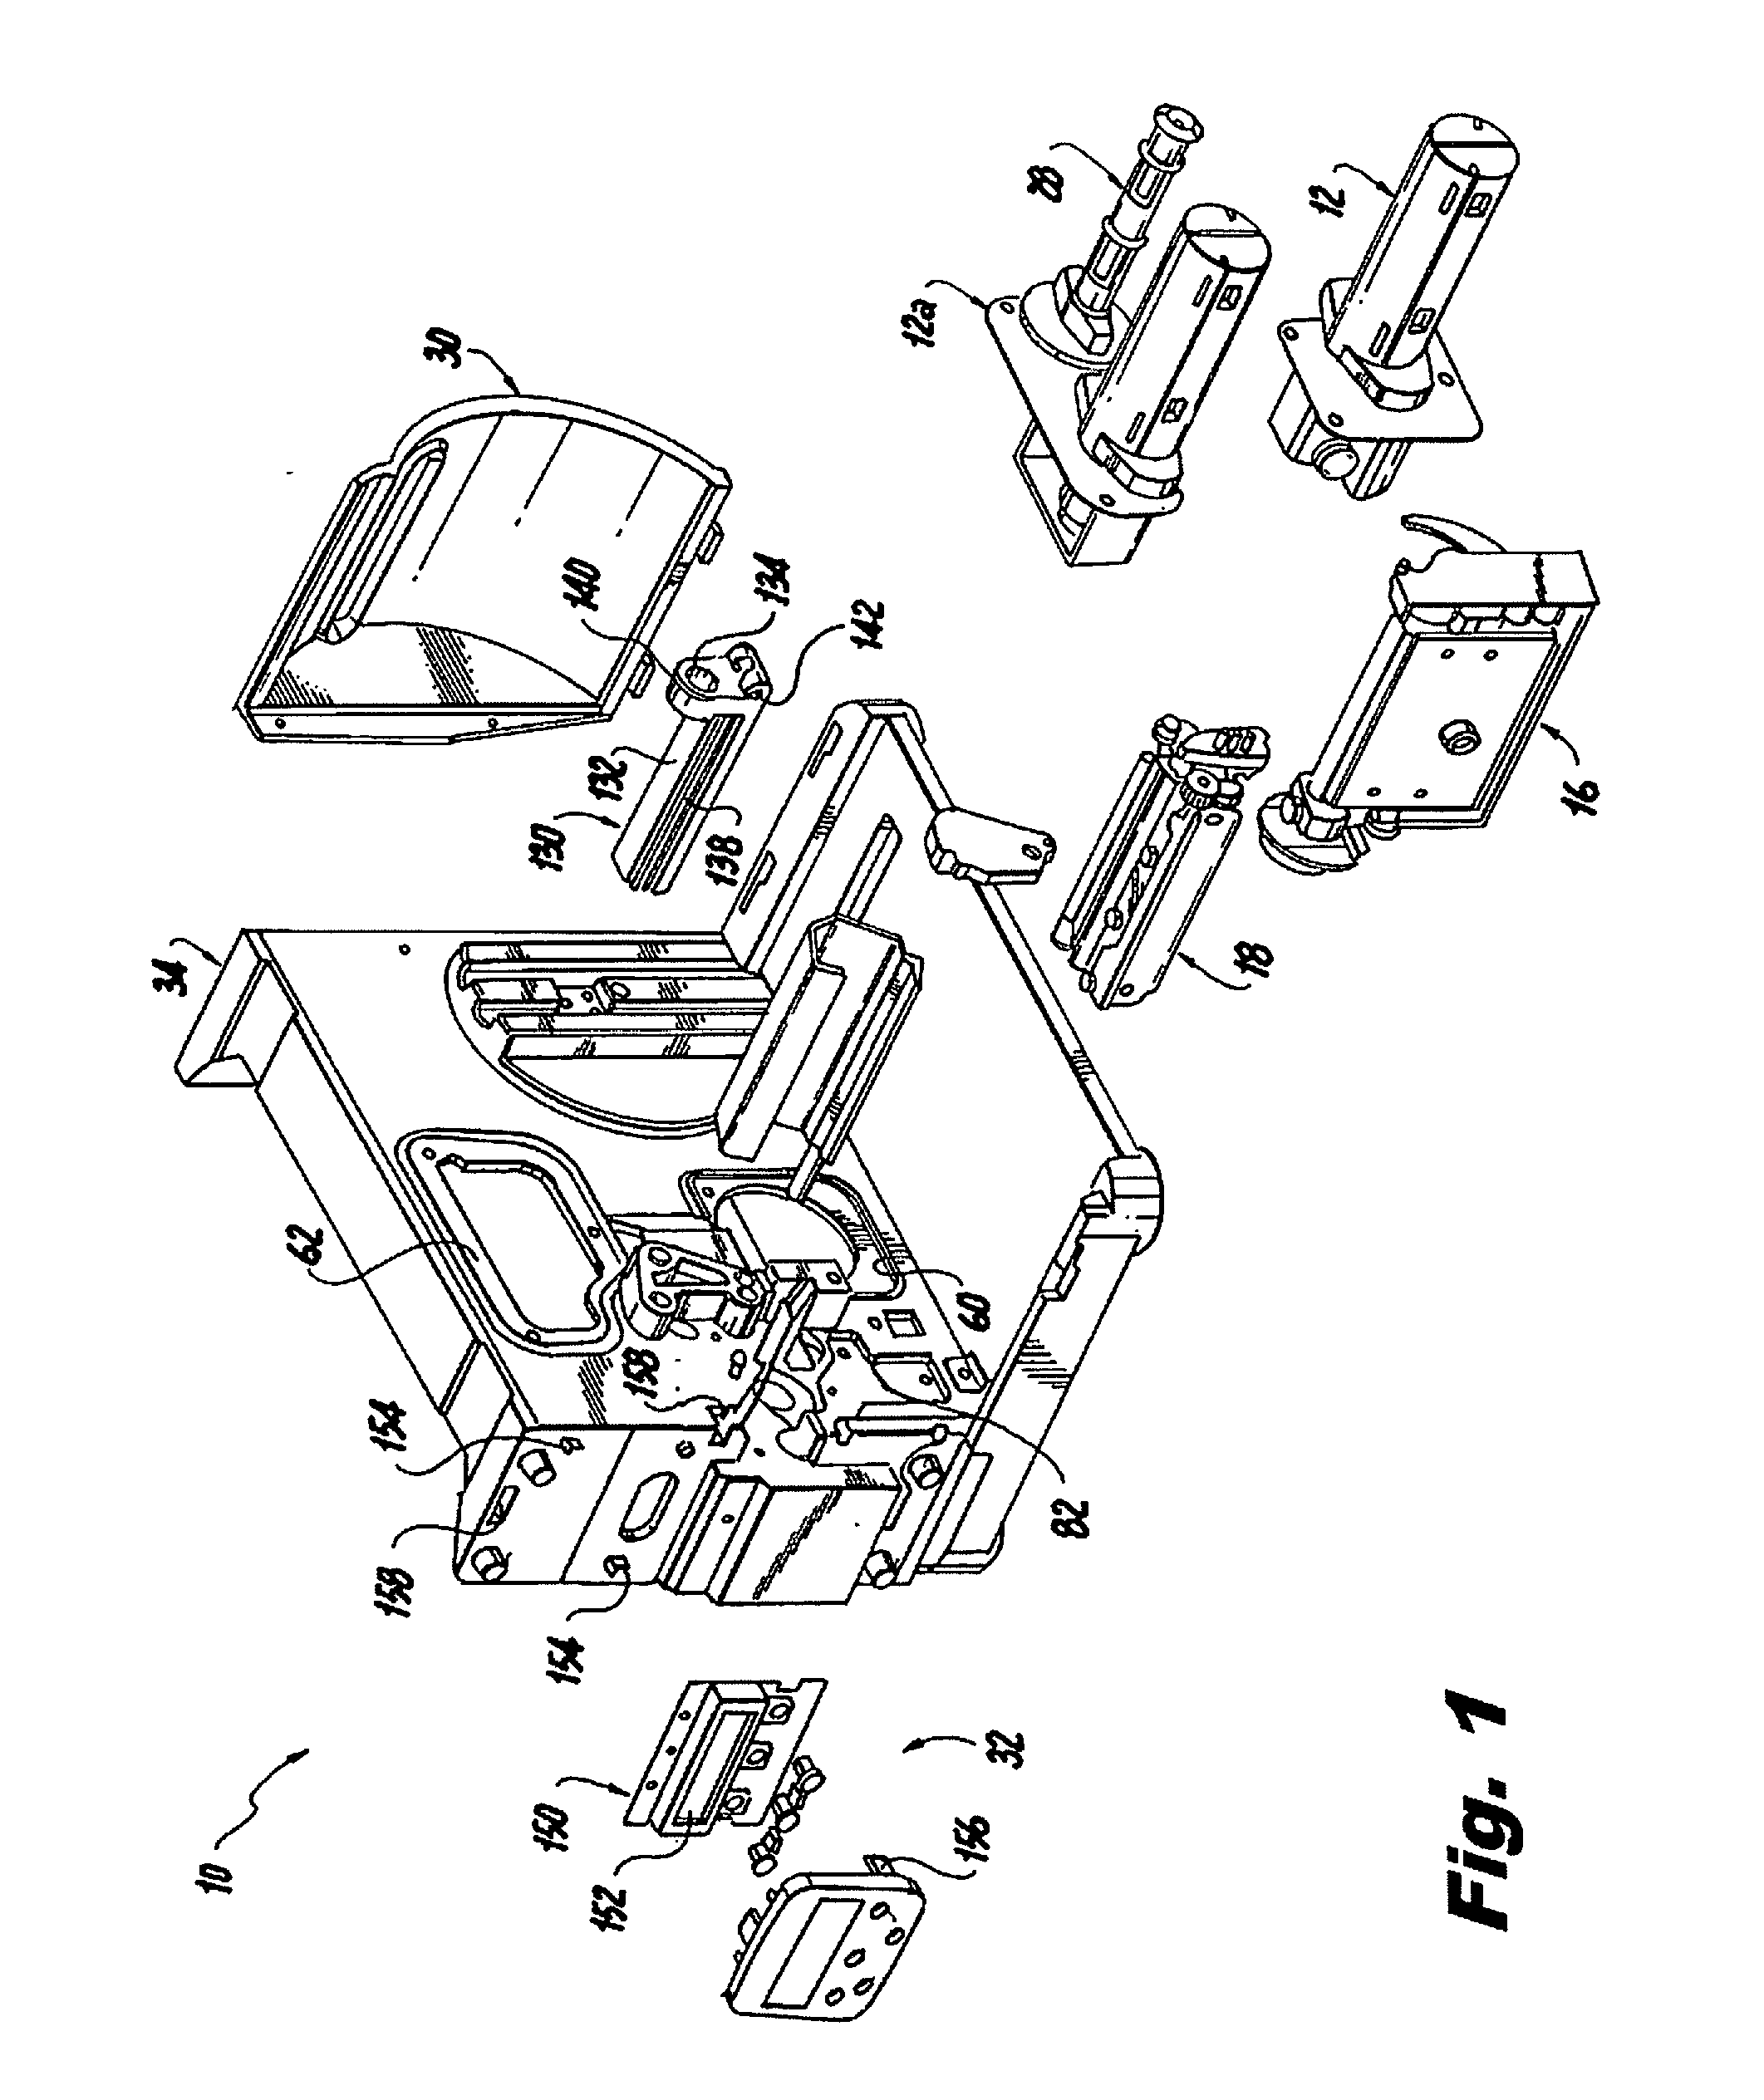 Platen roller assemblies for printer and methods of removal therefrom